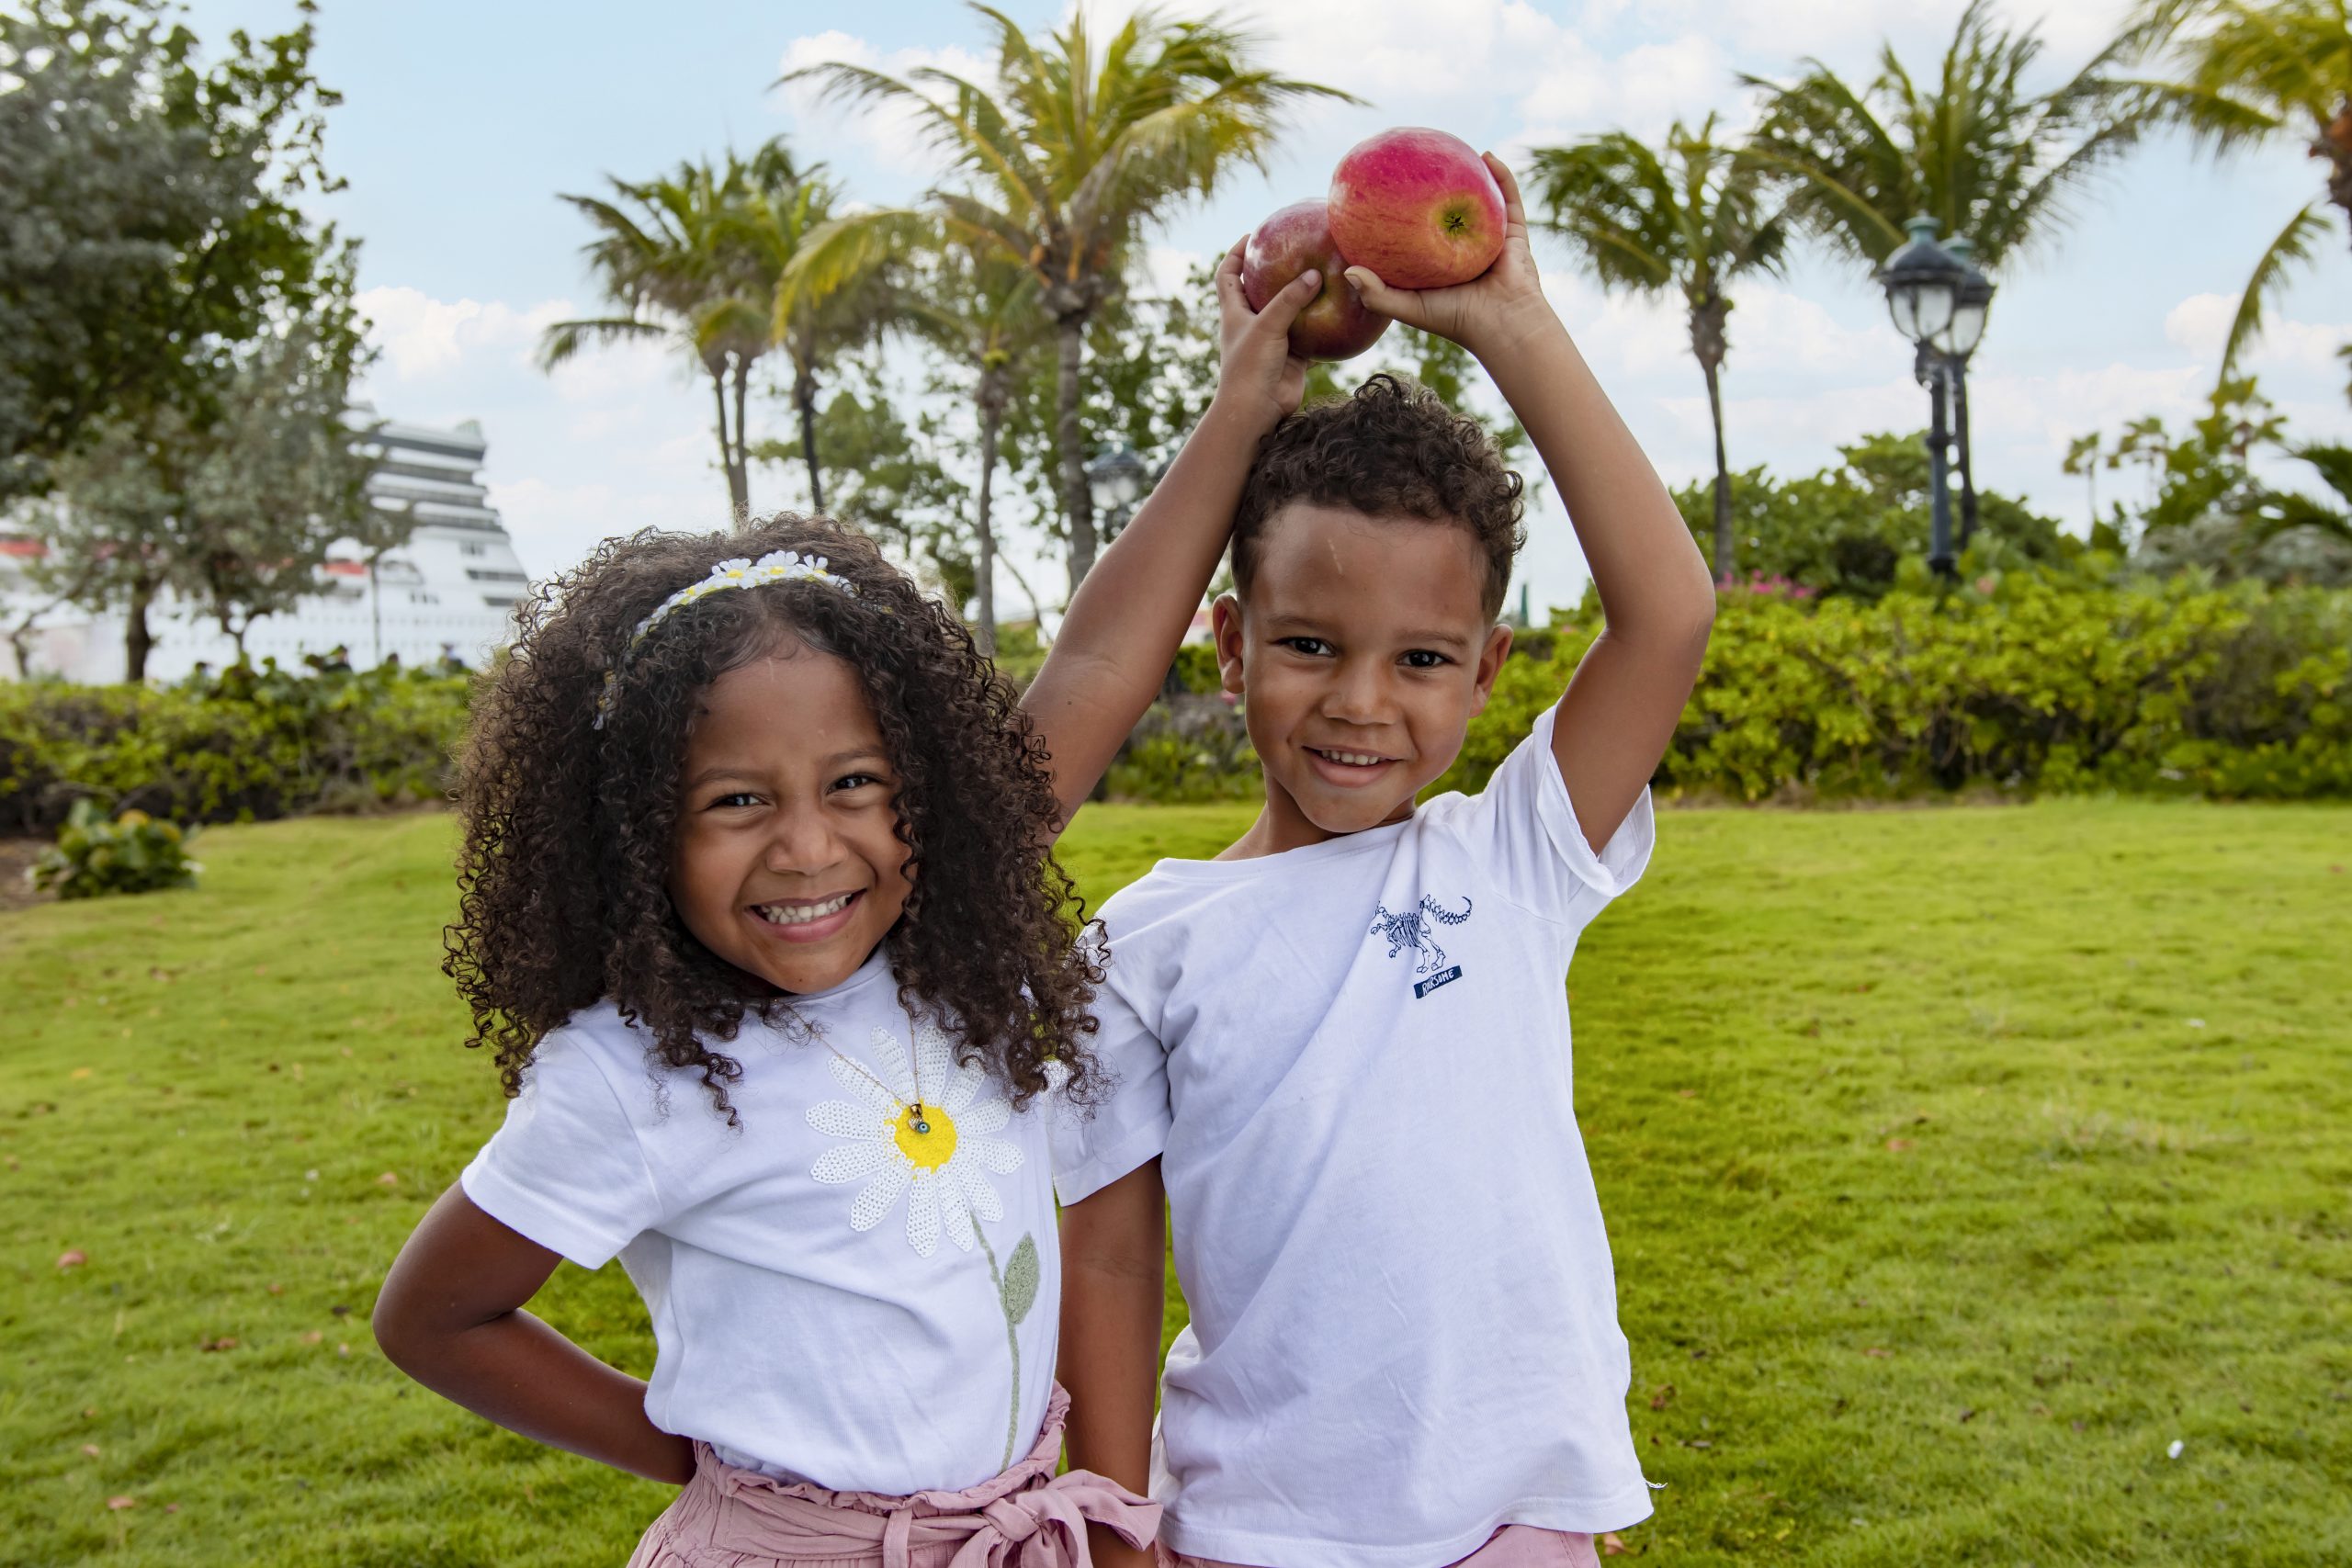 Two kids on a patch of grass are holding an apple above their head while smiling at the camera